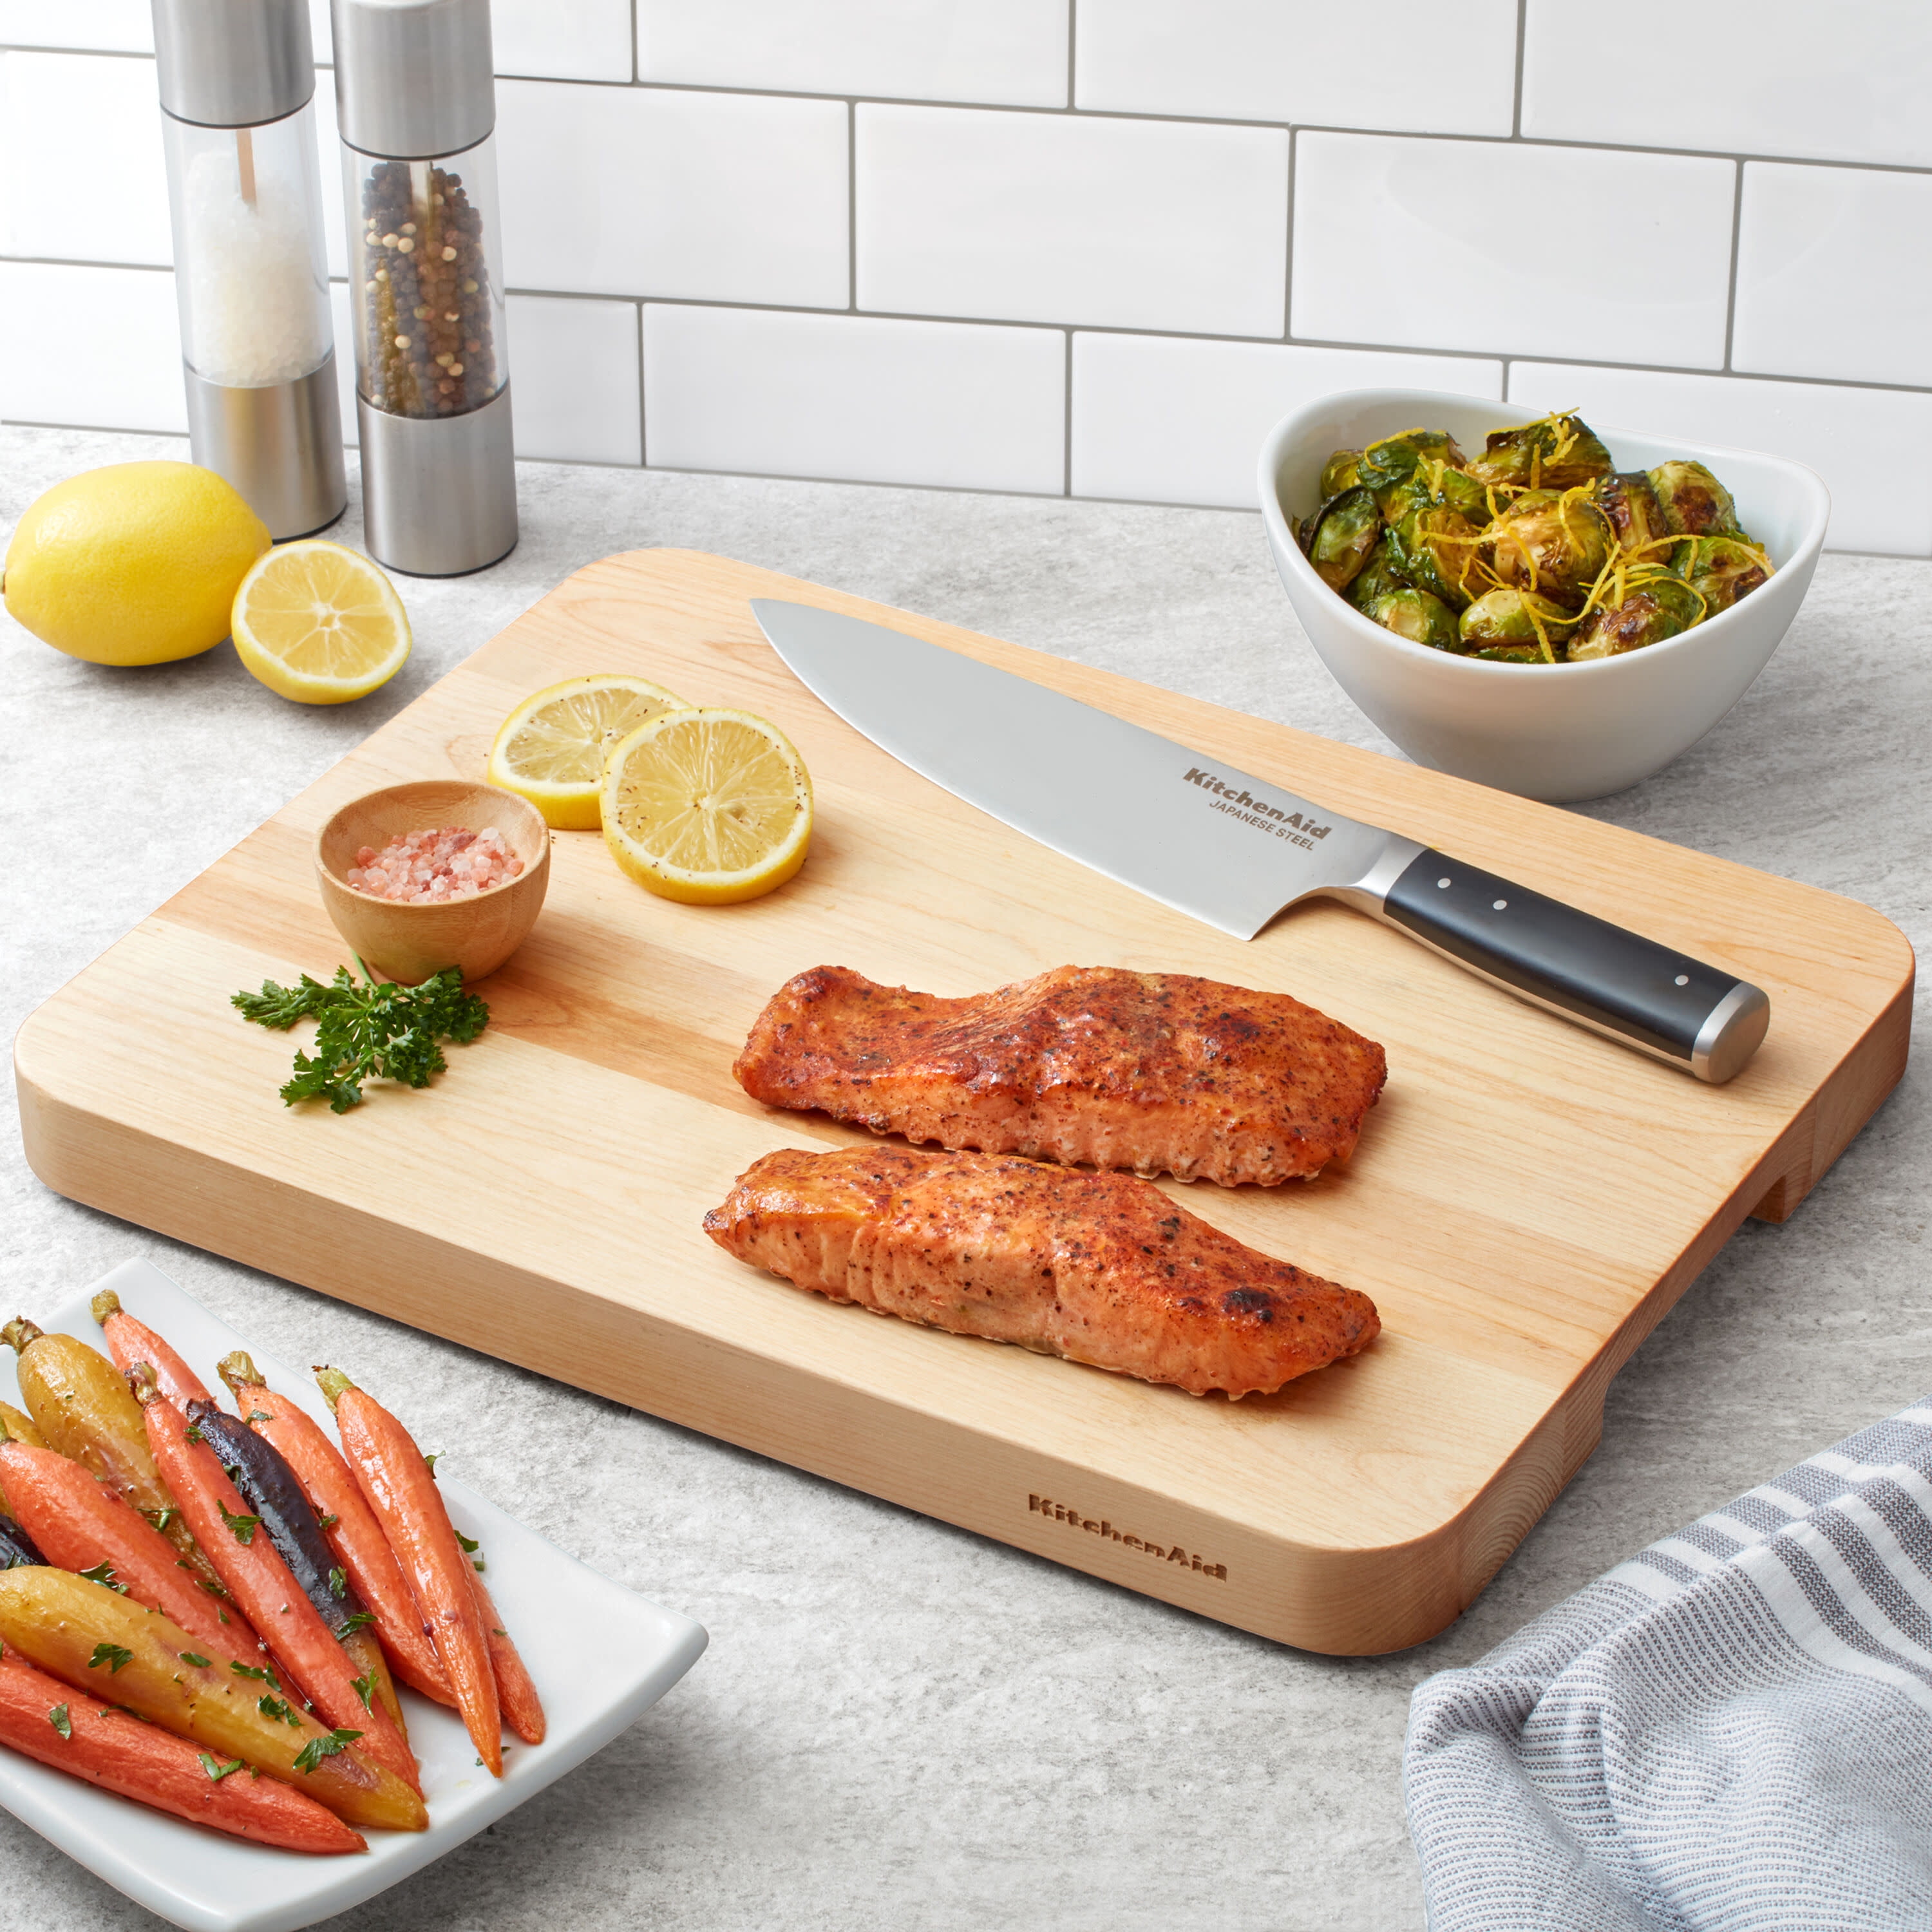 KitchenAid Classic Rubberwood Cutting Board with Perimeter Trench,  Extra-Large Reversible Chopping Board, 12-inch x 18-inch, Natural :  Everything Else 